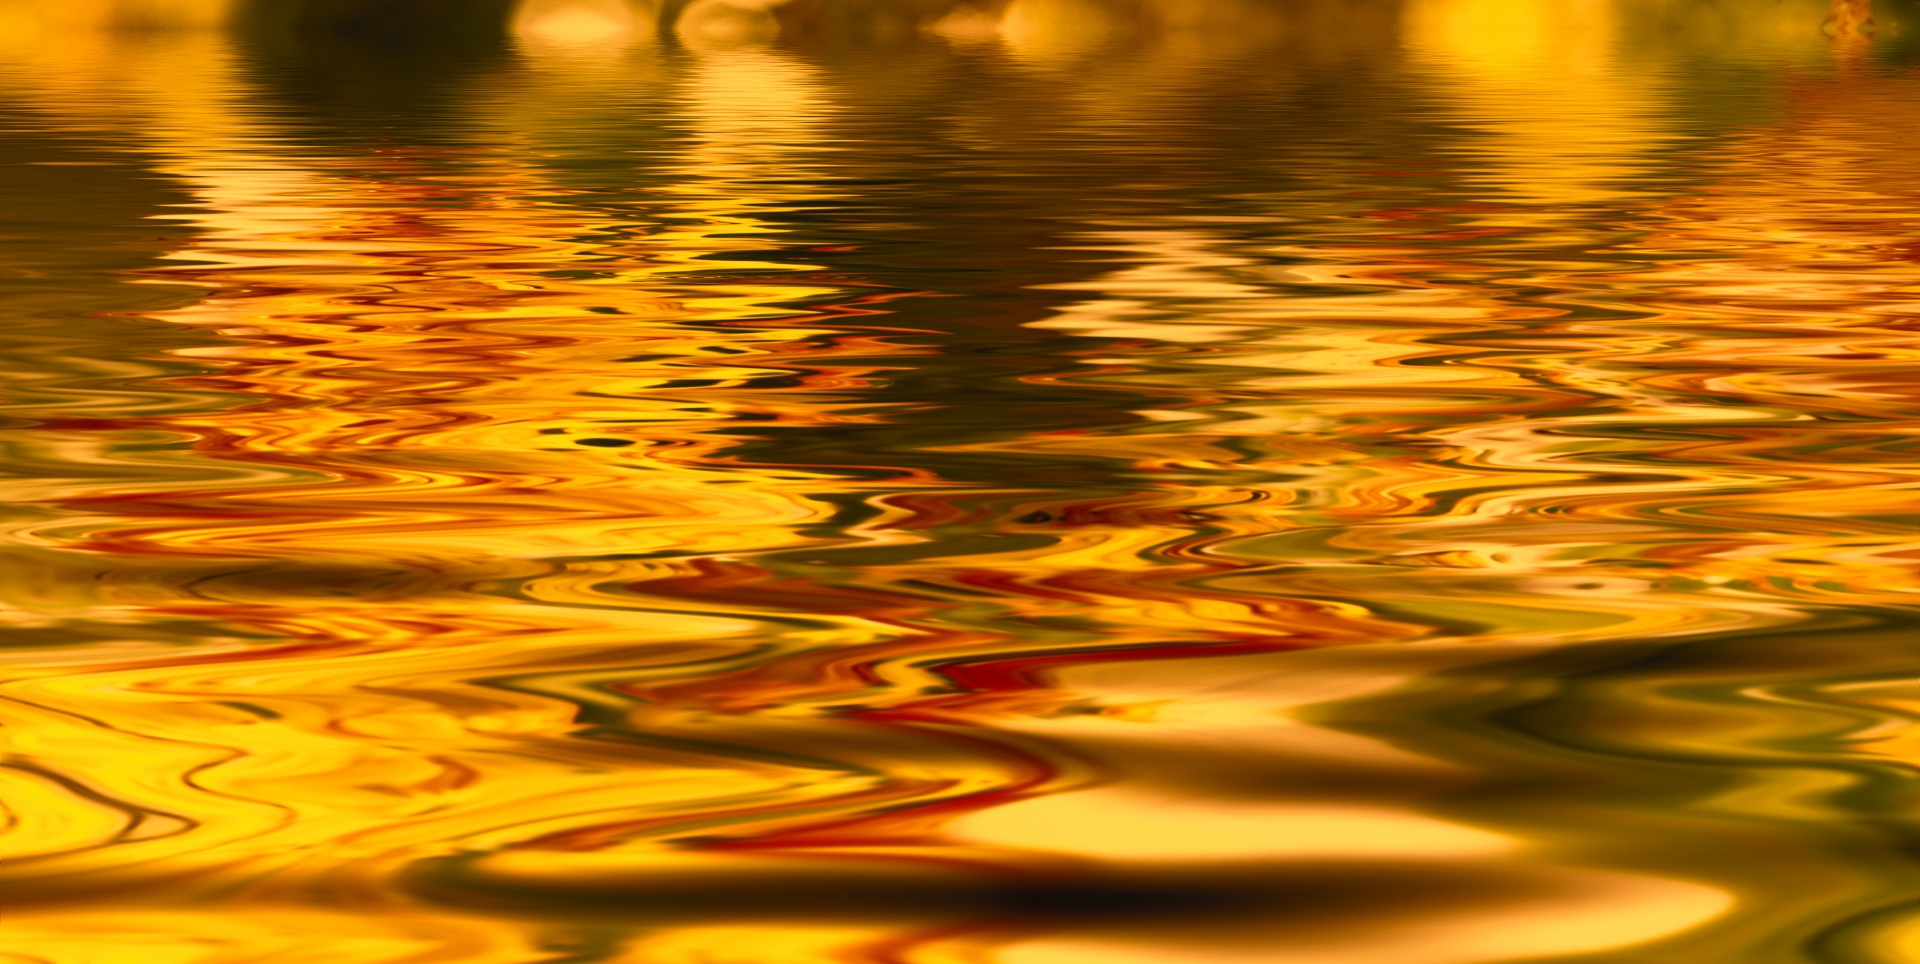 Water Abstract Golden